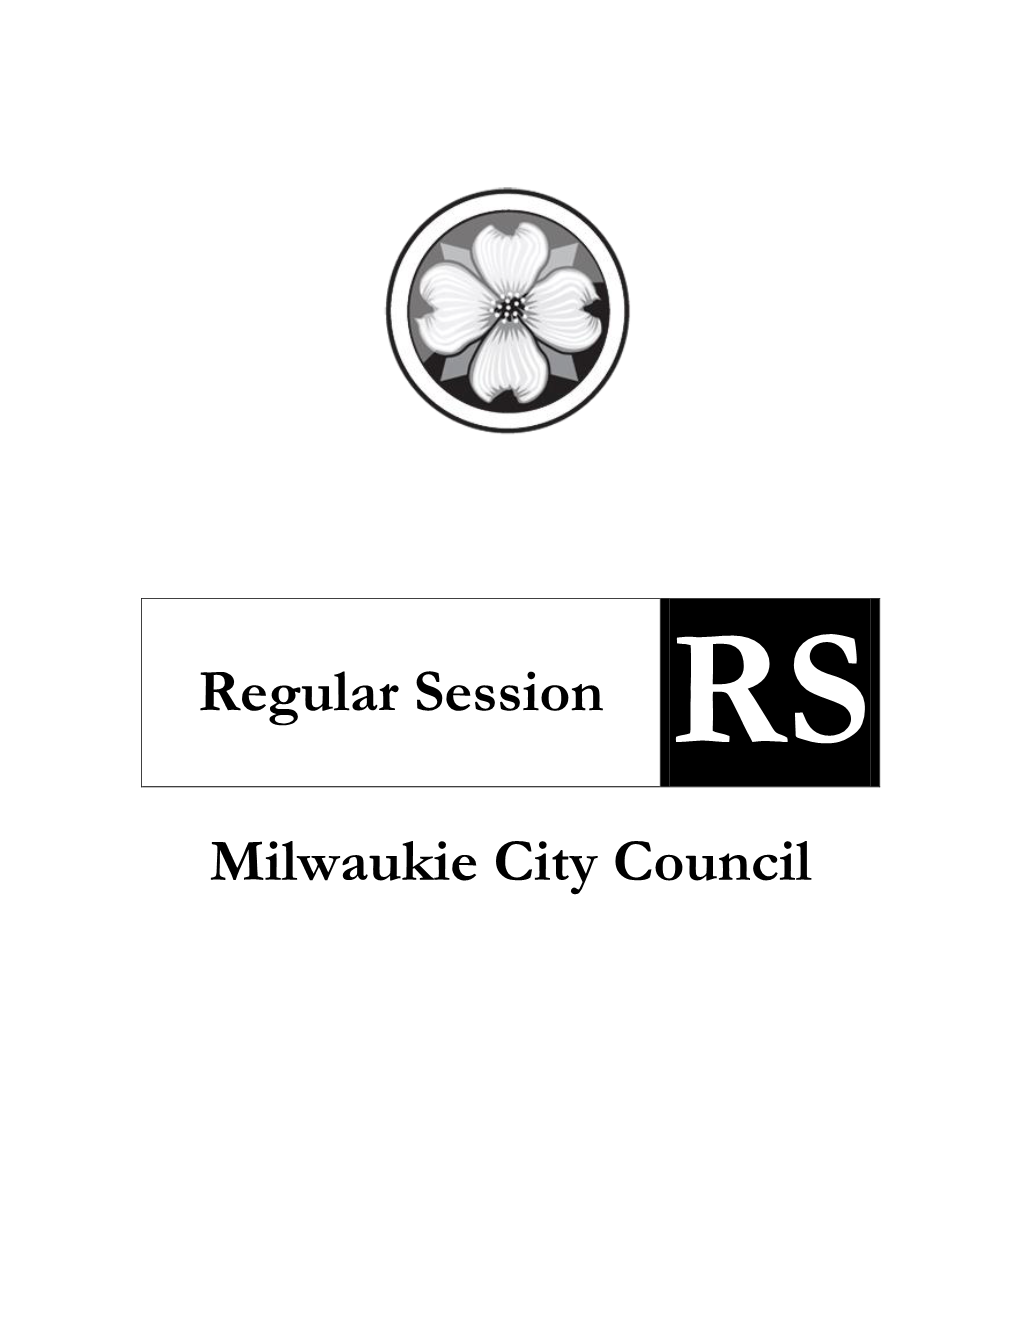 Regular Session RS Milwaukie City Council